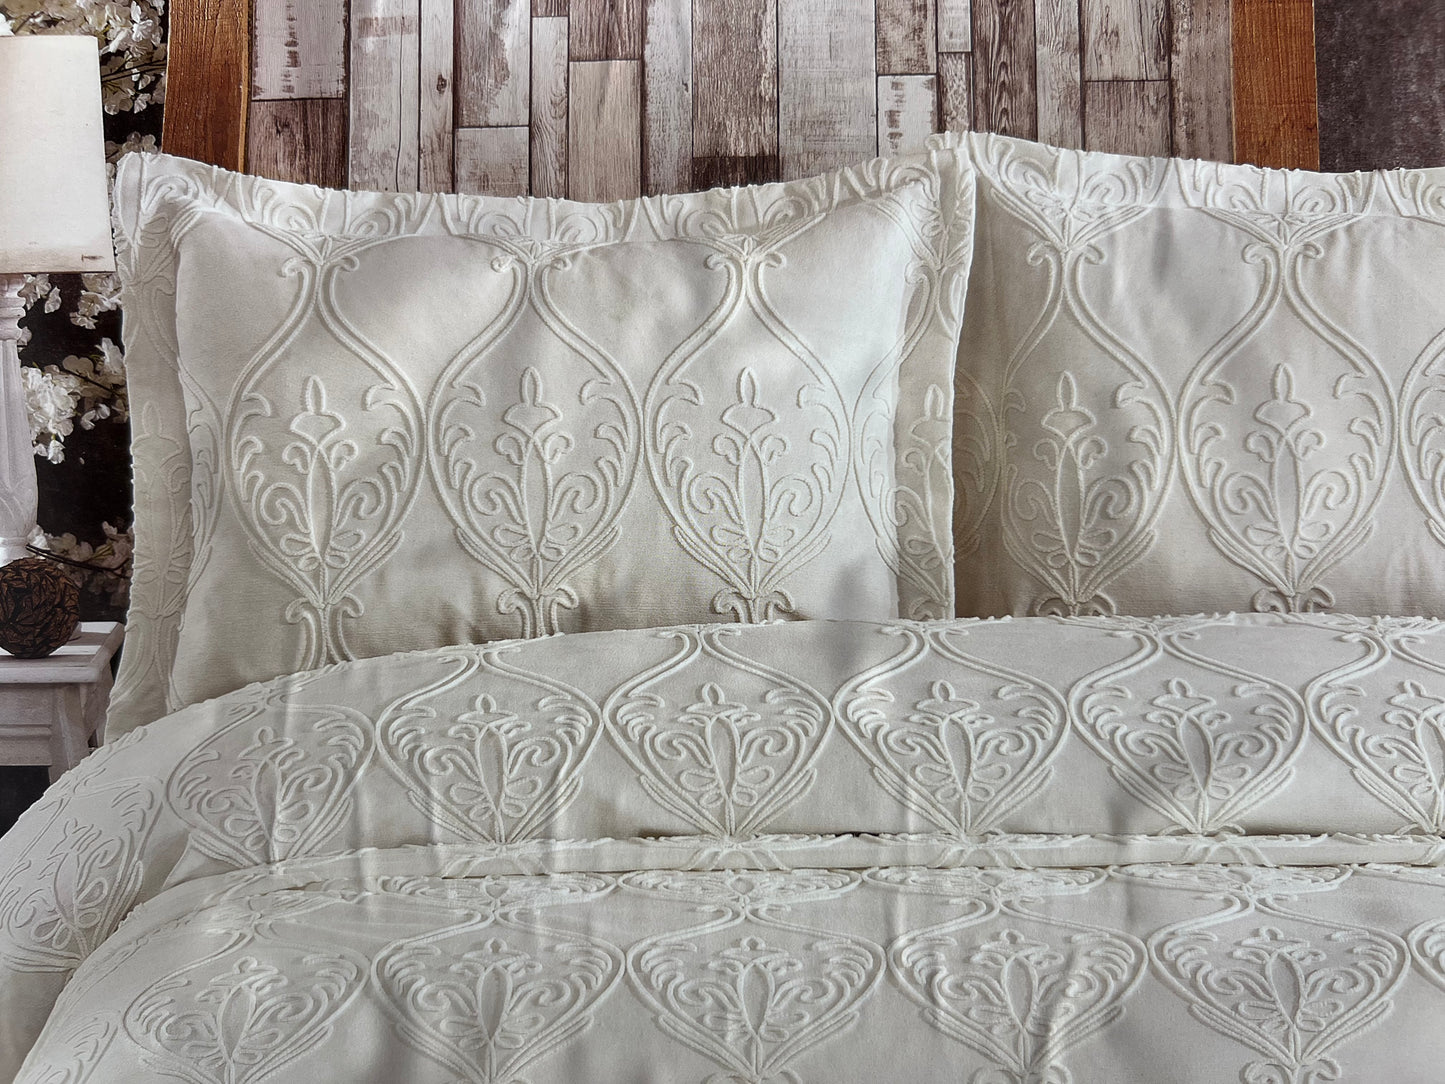 Luxurious embroidered sofa or bed cover Maya Cream